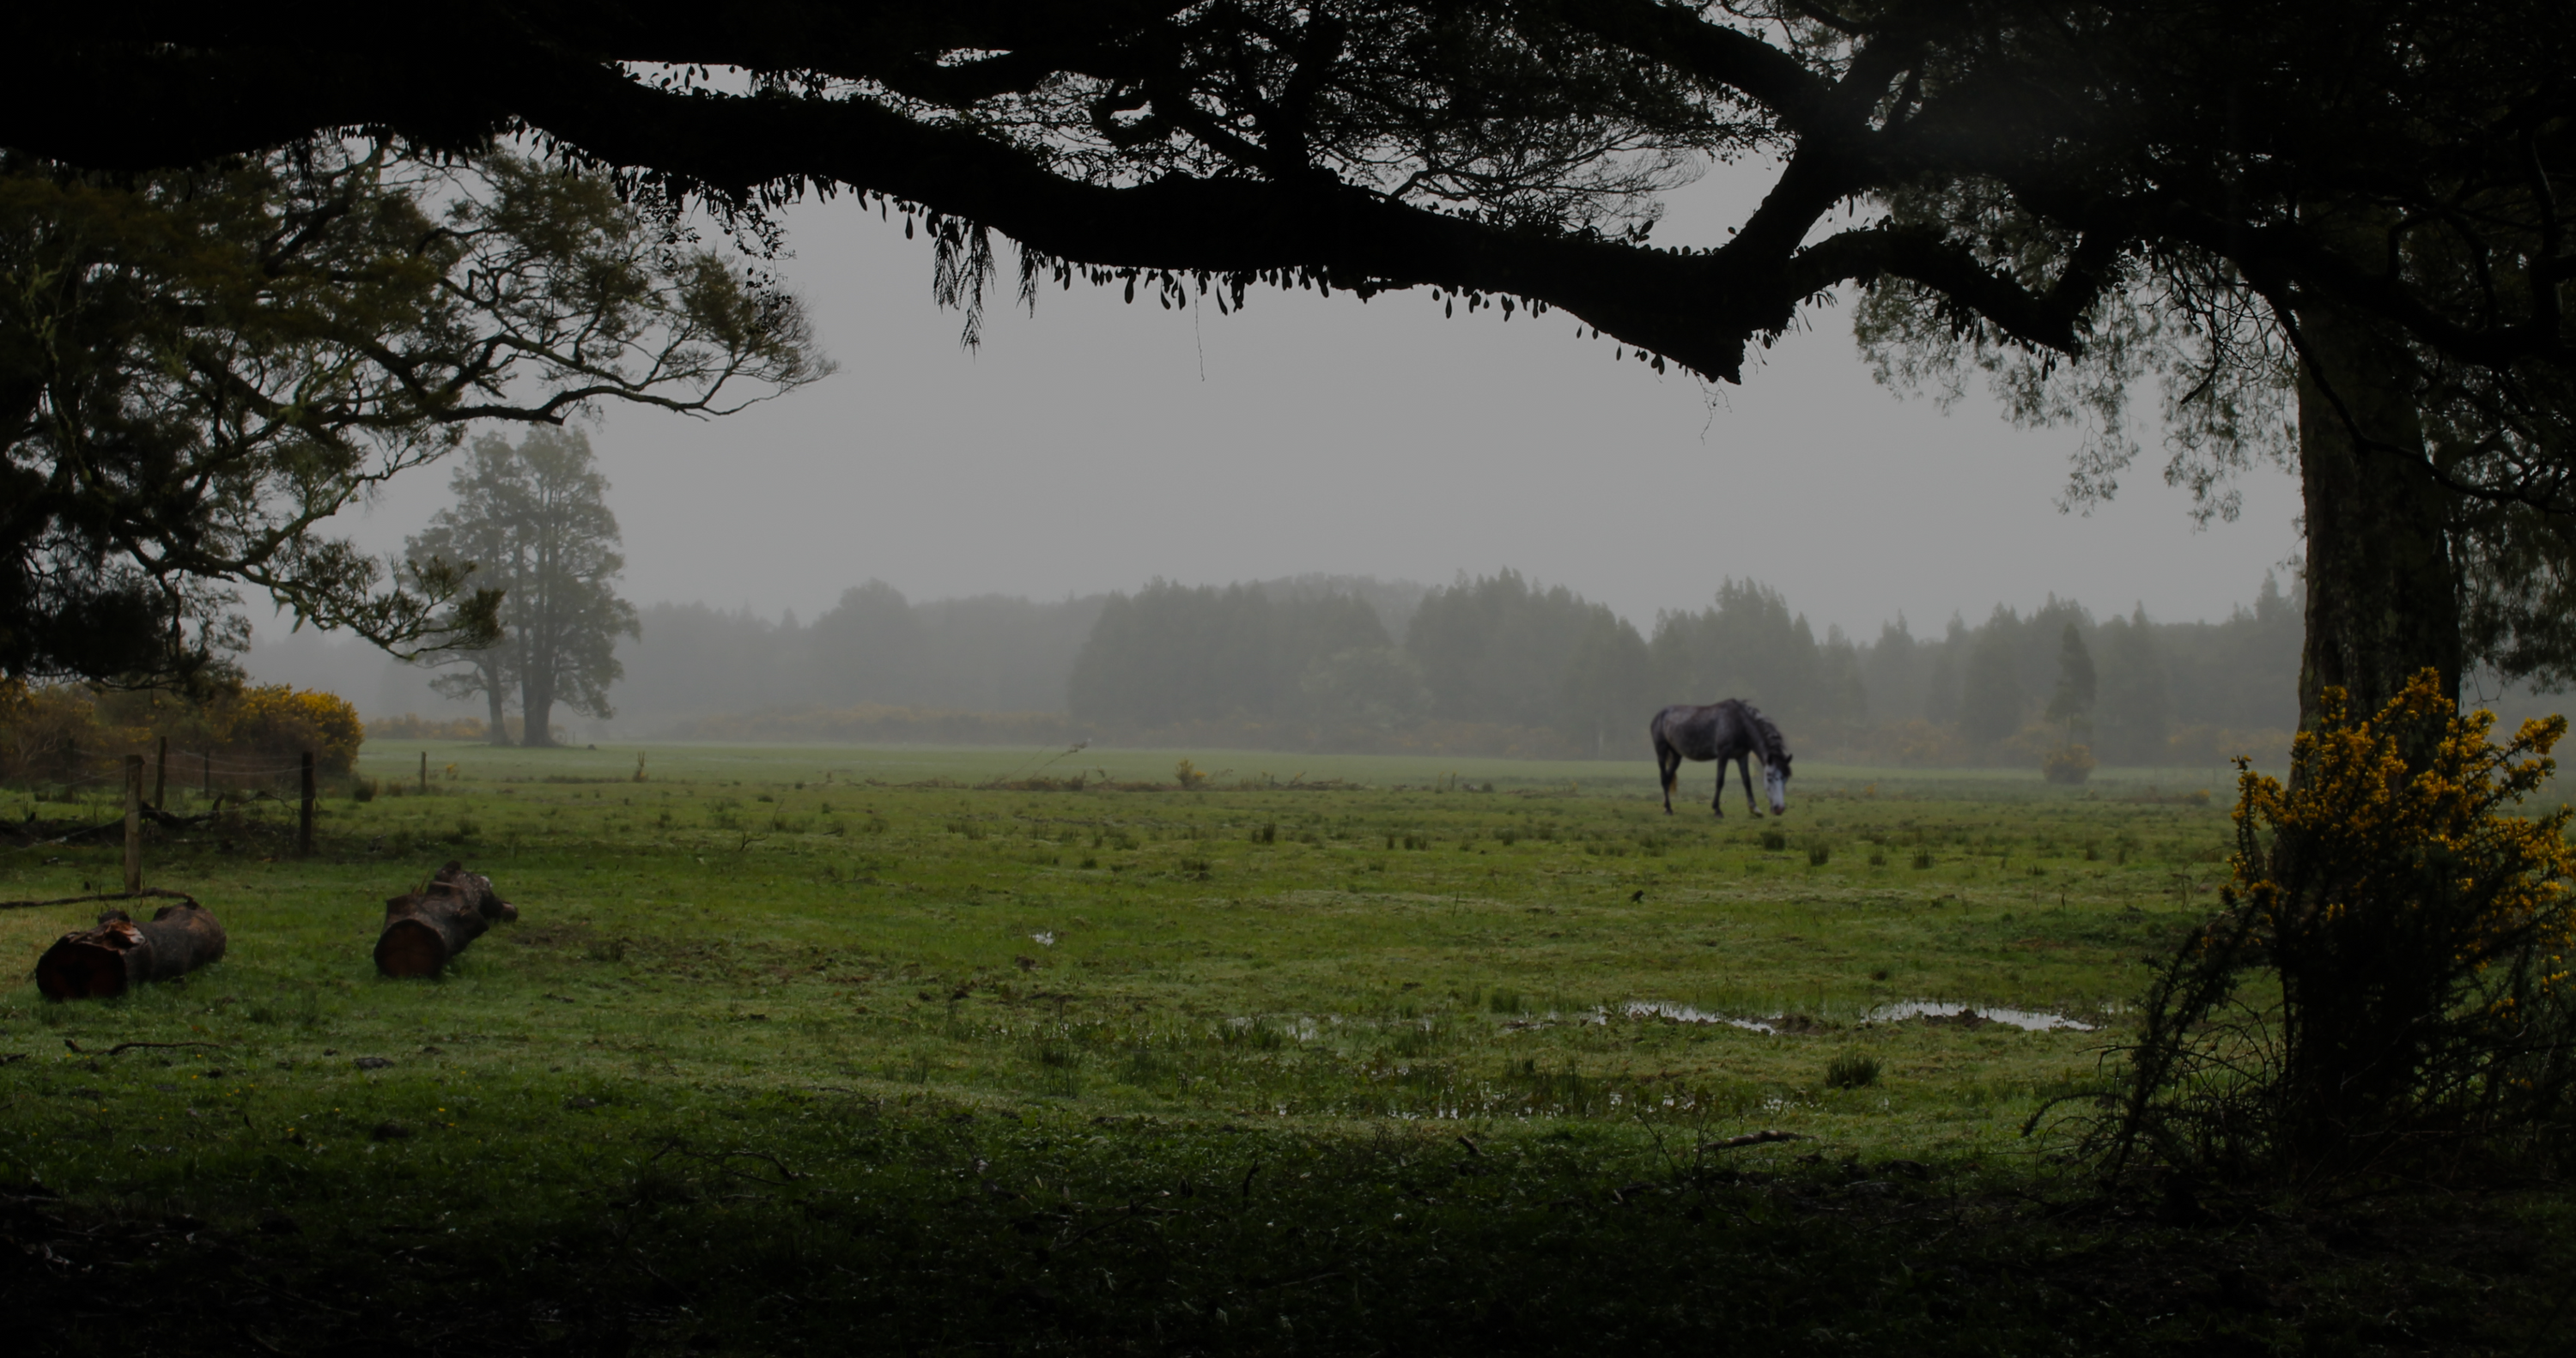 equestrian riding gear and horse trail riding gear for rainy days, grey pony grazes in a green pasture on a rainy day